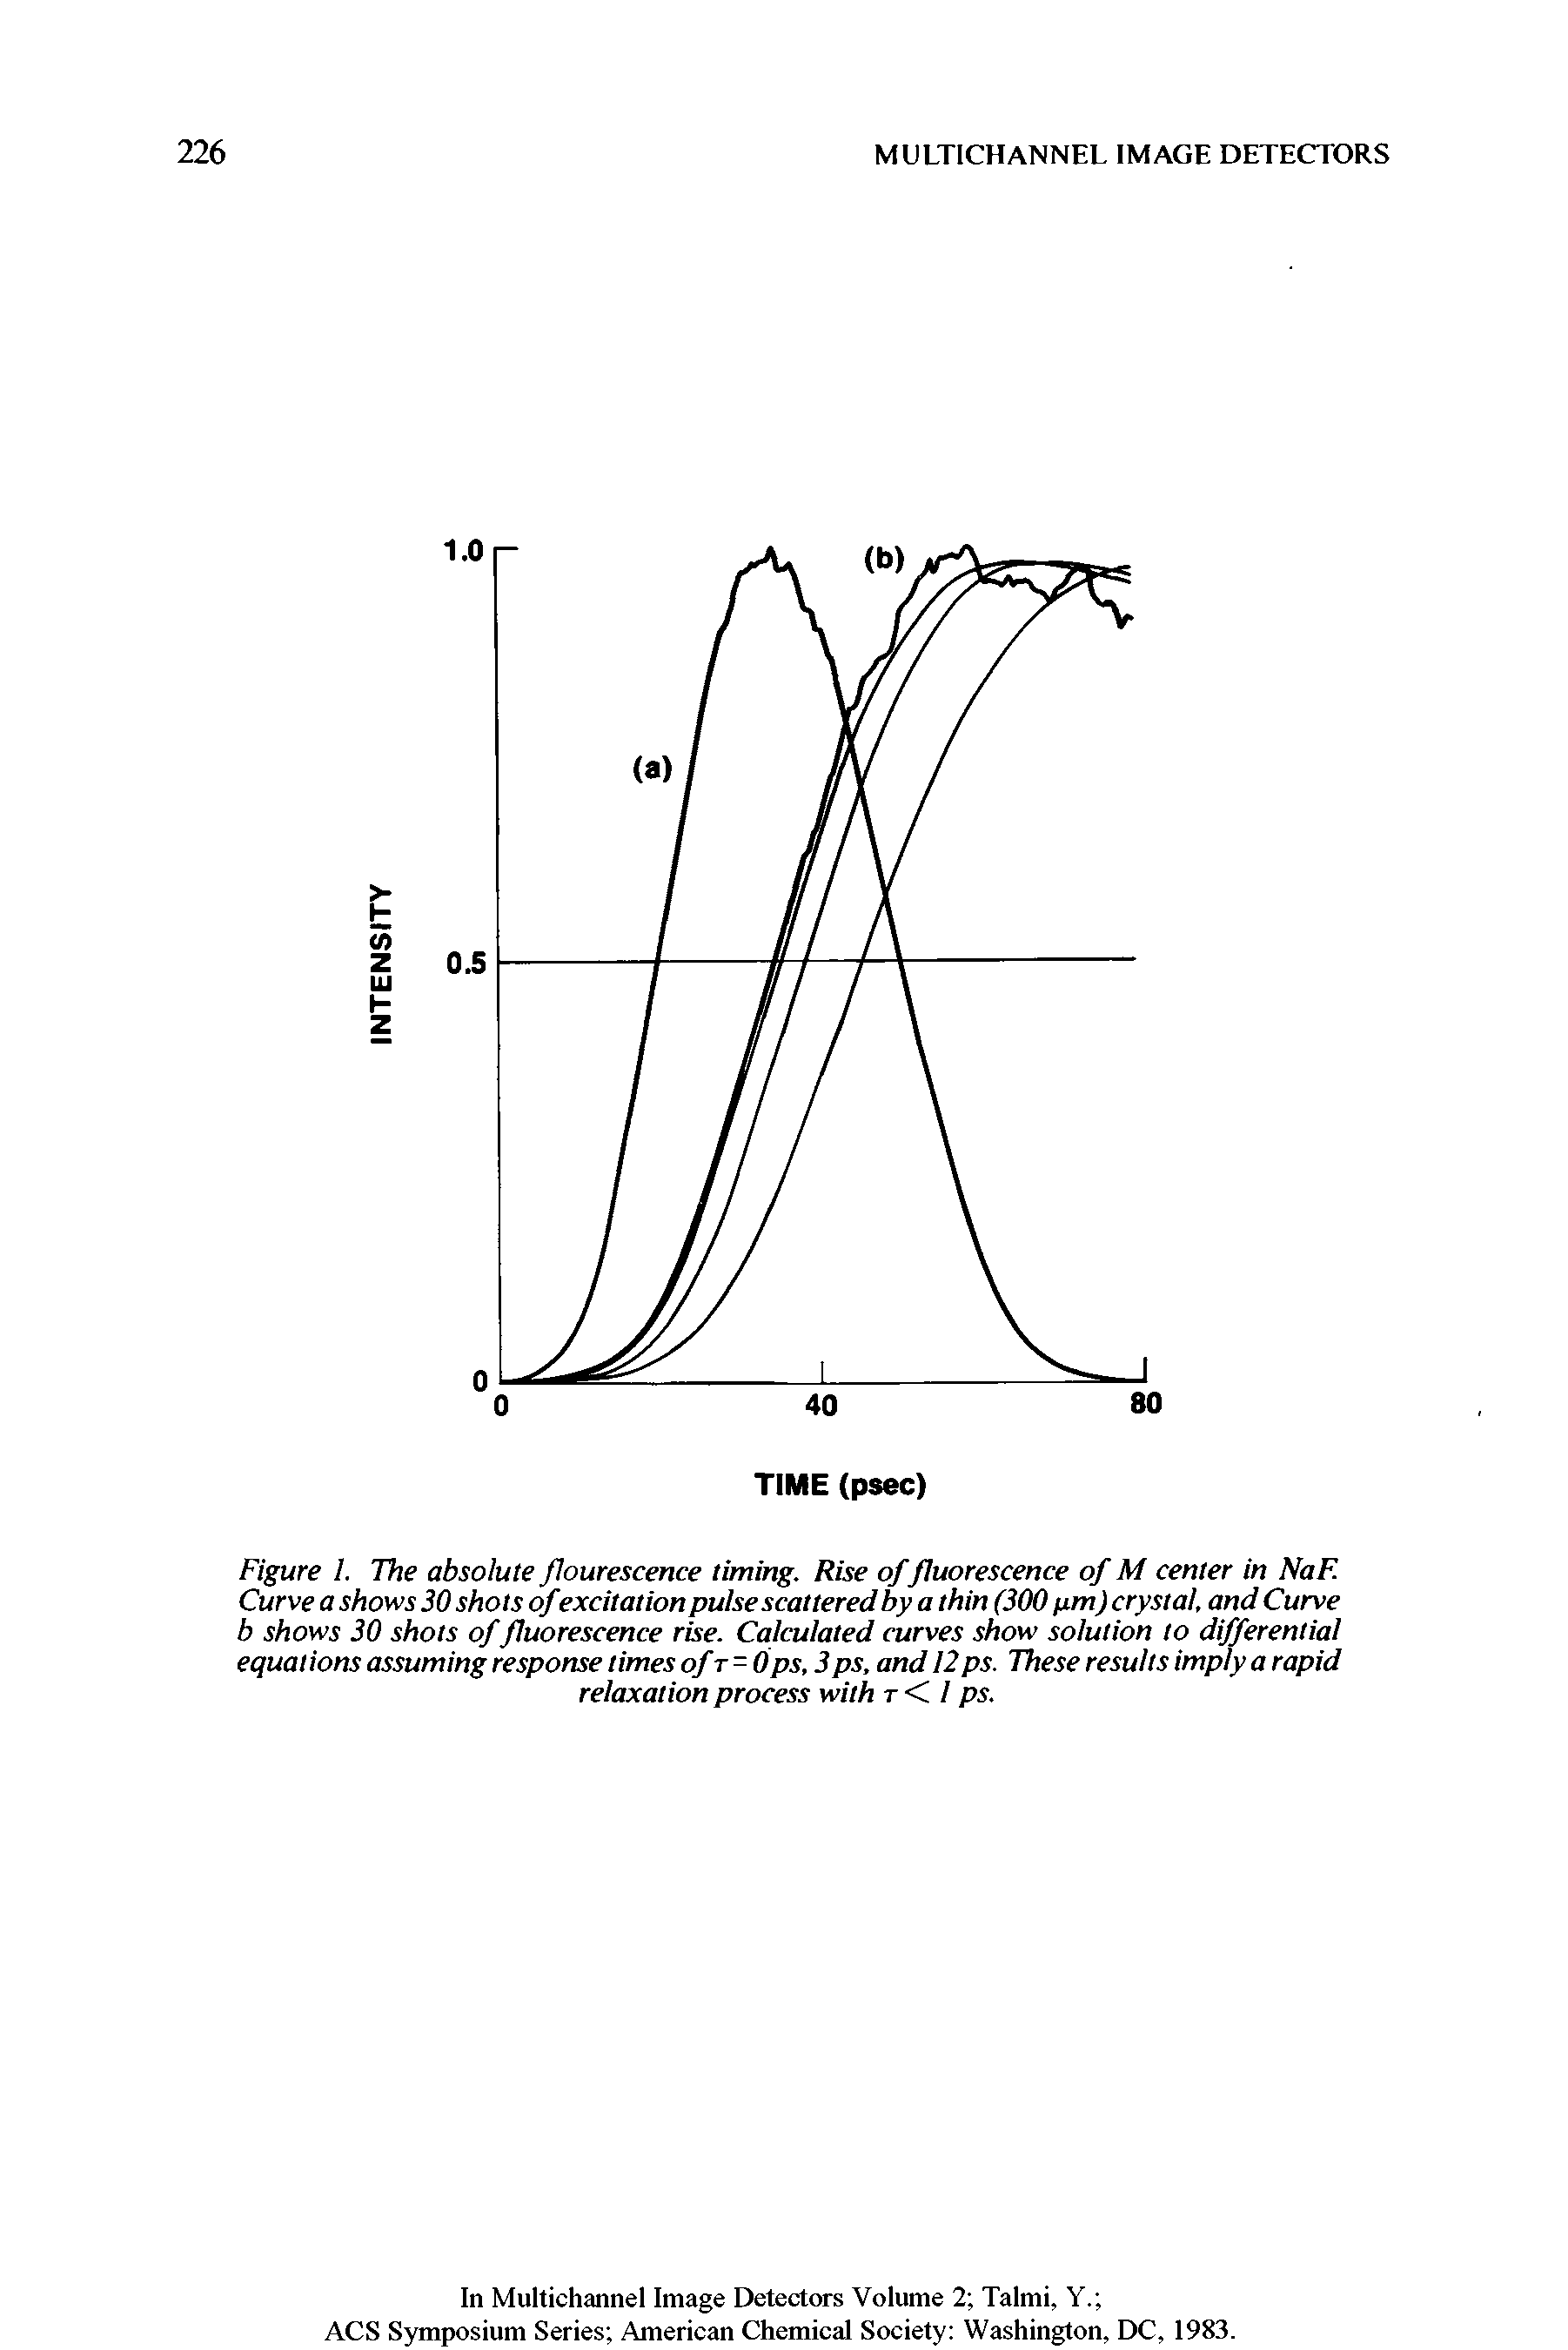 Figure 1. The absolute flourescence timing. Rise of fluorescence of M center in NaF. Curve a shows 30 shots ofexcitation pulse scattered by a thin (300 pm) crystal, and Curve b shows 30 shots of fluorescence rise. Calculated curves show solution to differential equations assuming response times ofr-Ops, 3ps, and 12ps. These results imply a rapid relaxation process with r < / ps.